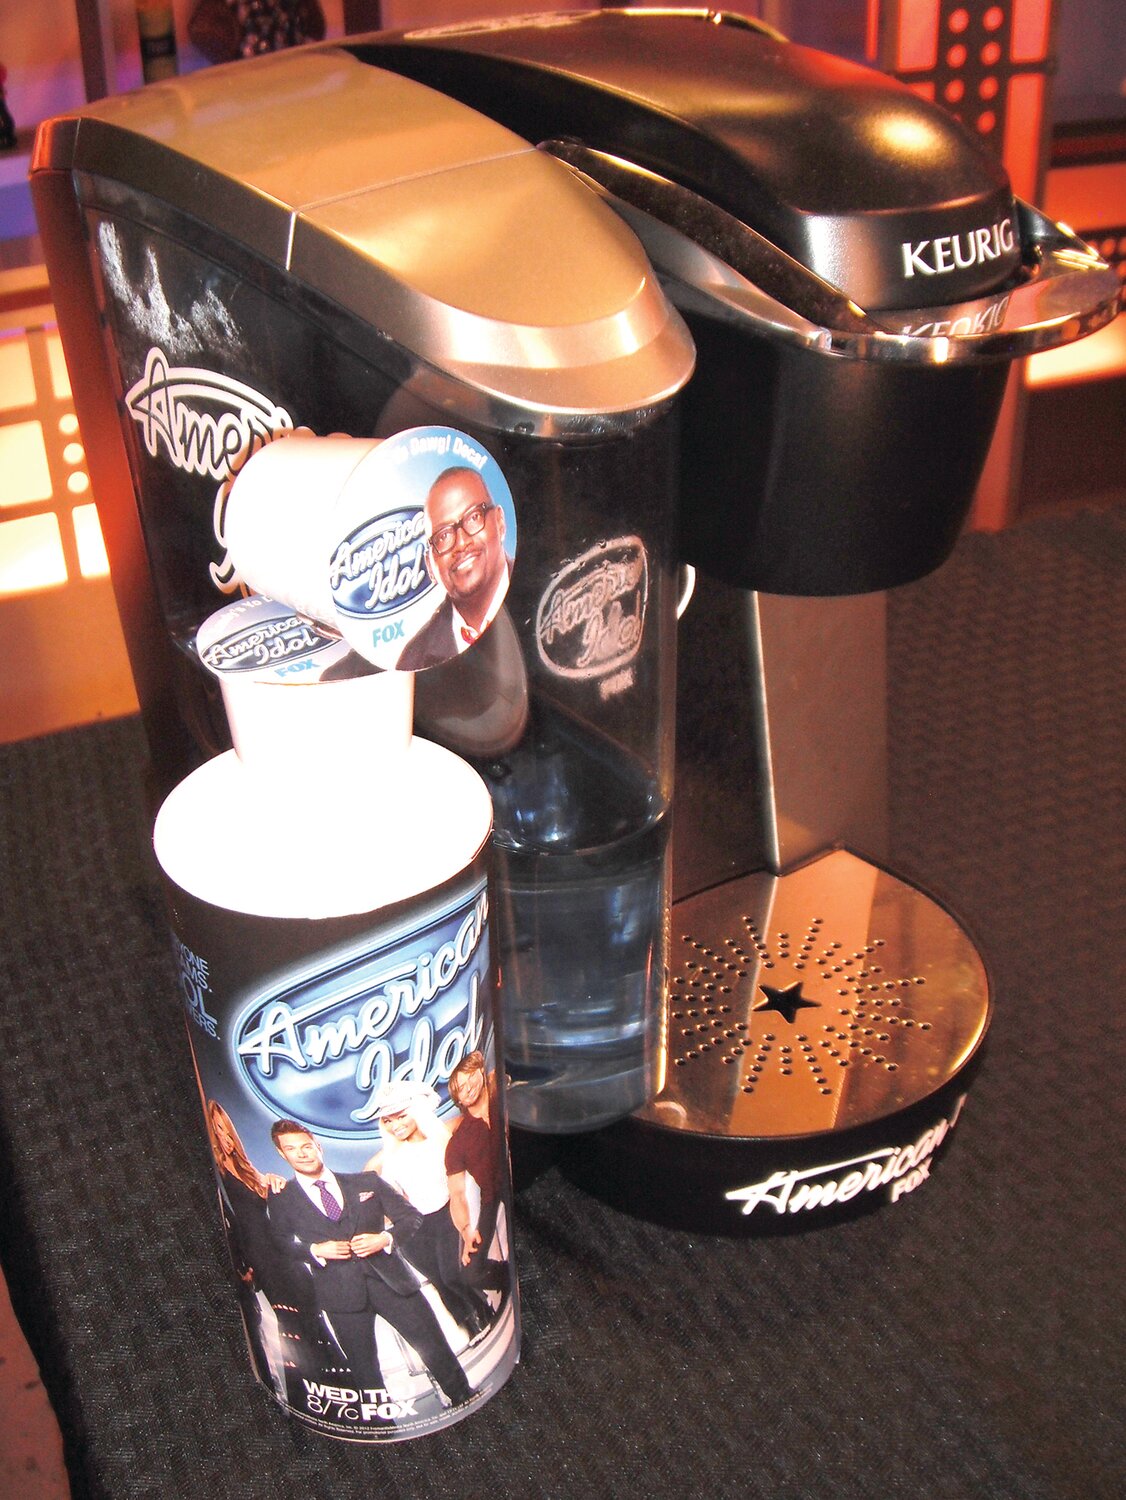 A rare American Idol collectible on the market today is a Keurig pod coffee machine. It sells for $500 in new condition.